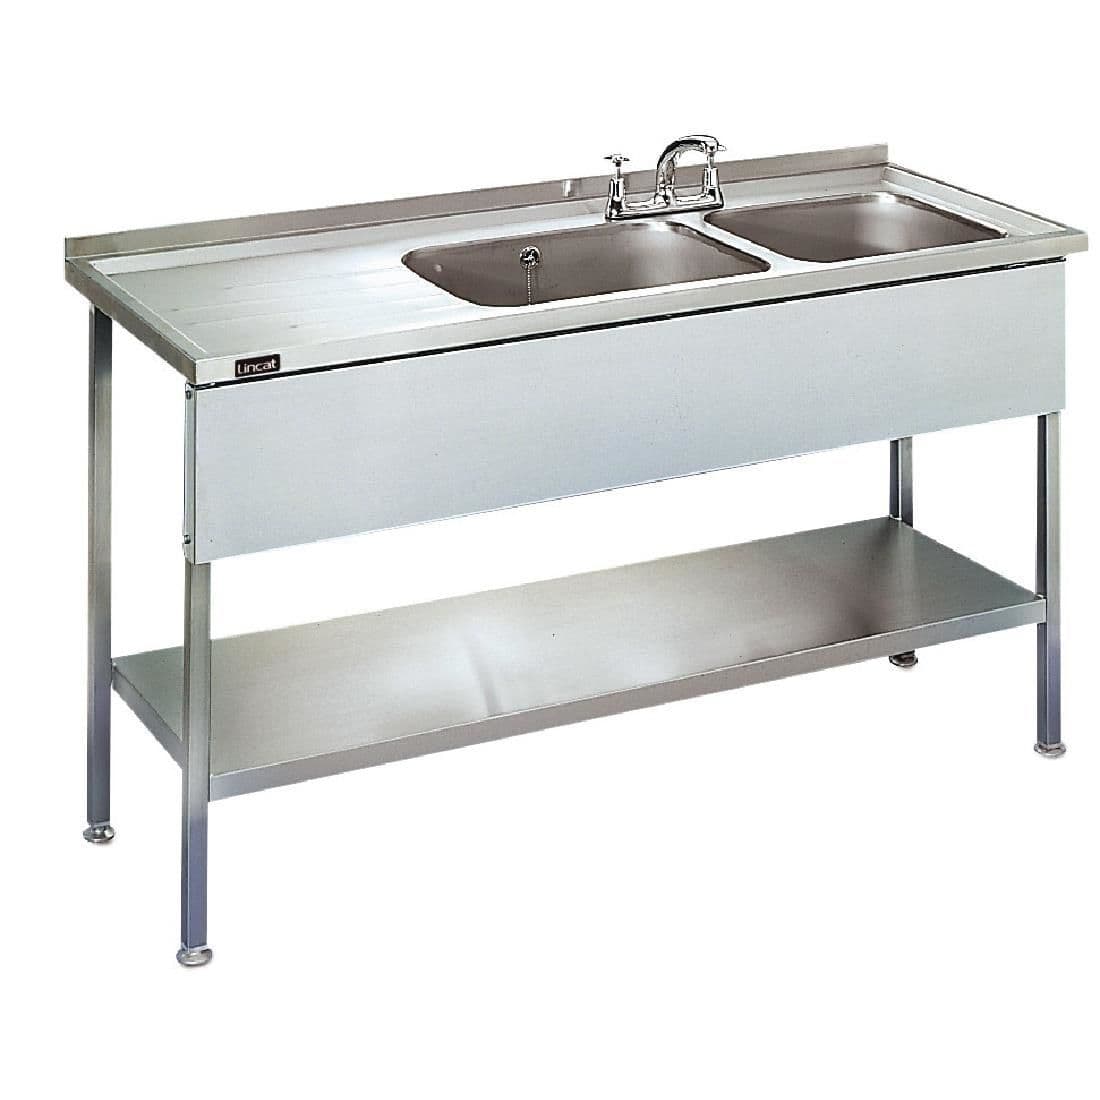 GJ707 Lincat Stainless Steel Double Sink Unit with Left Hand Drainer L884LH JD Catering Equipment Solutions Ltd